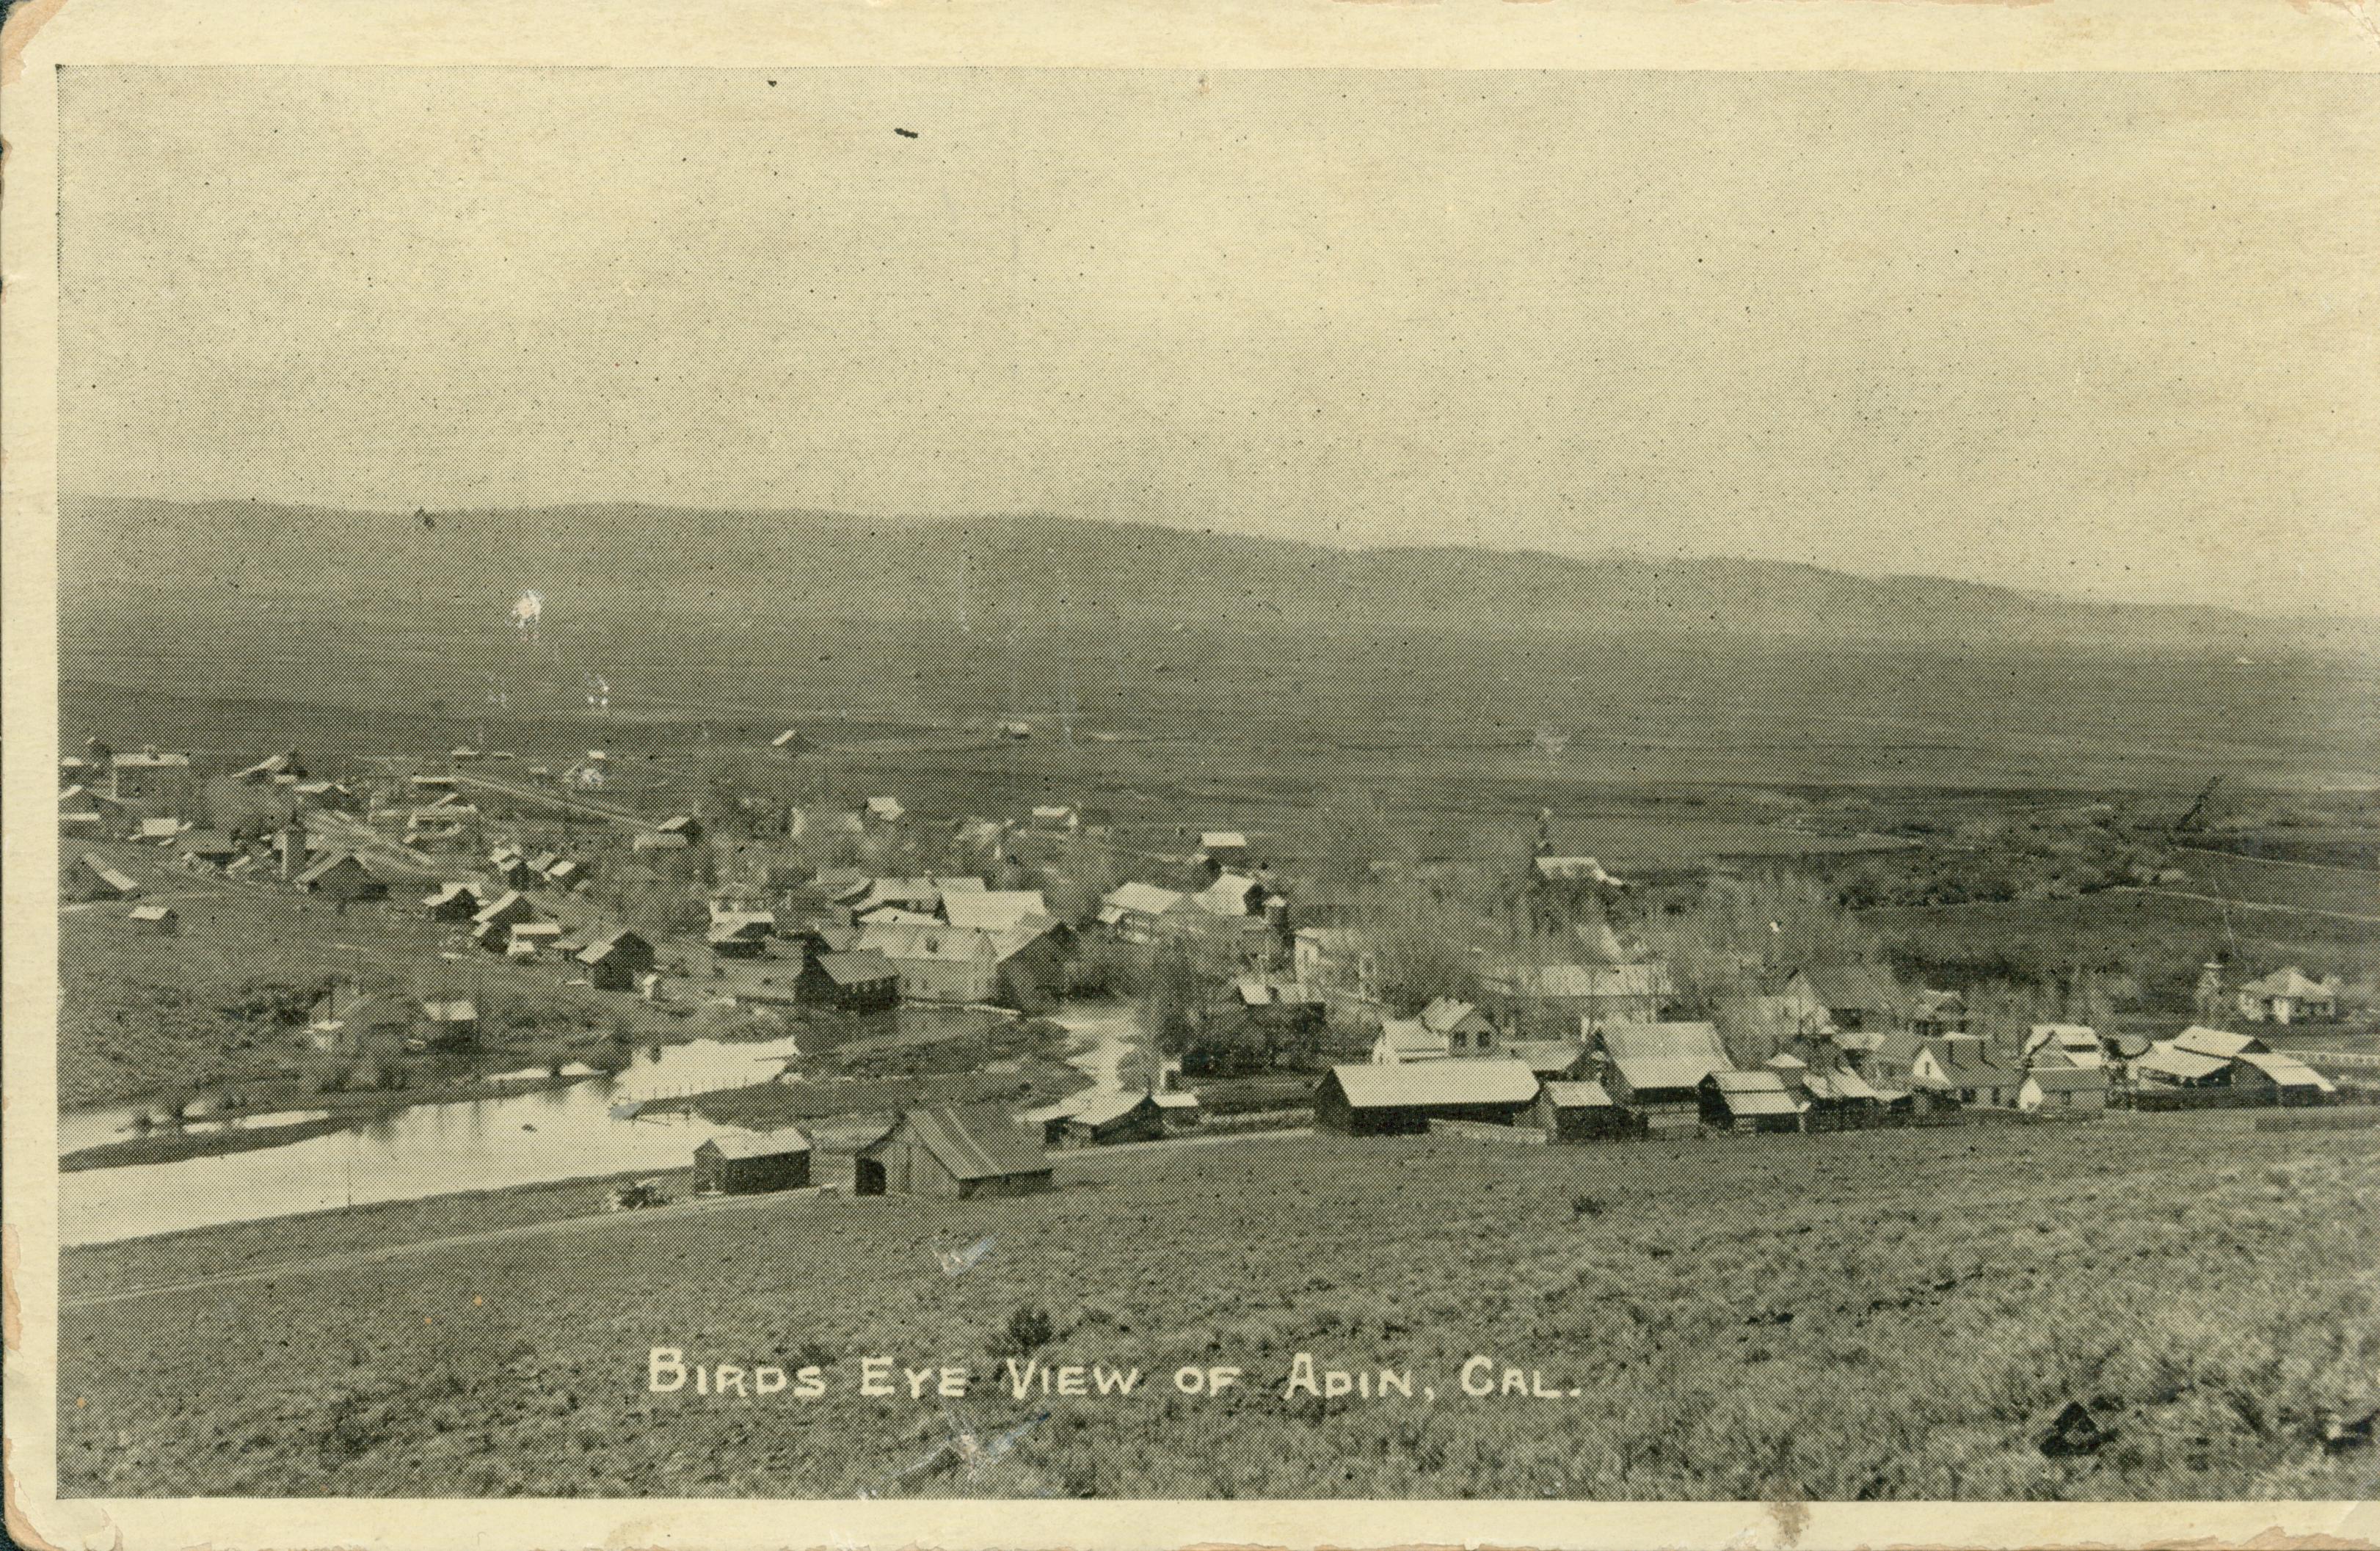 This postcard shows a bird's eye view of Adin in Modoc County